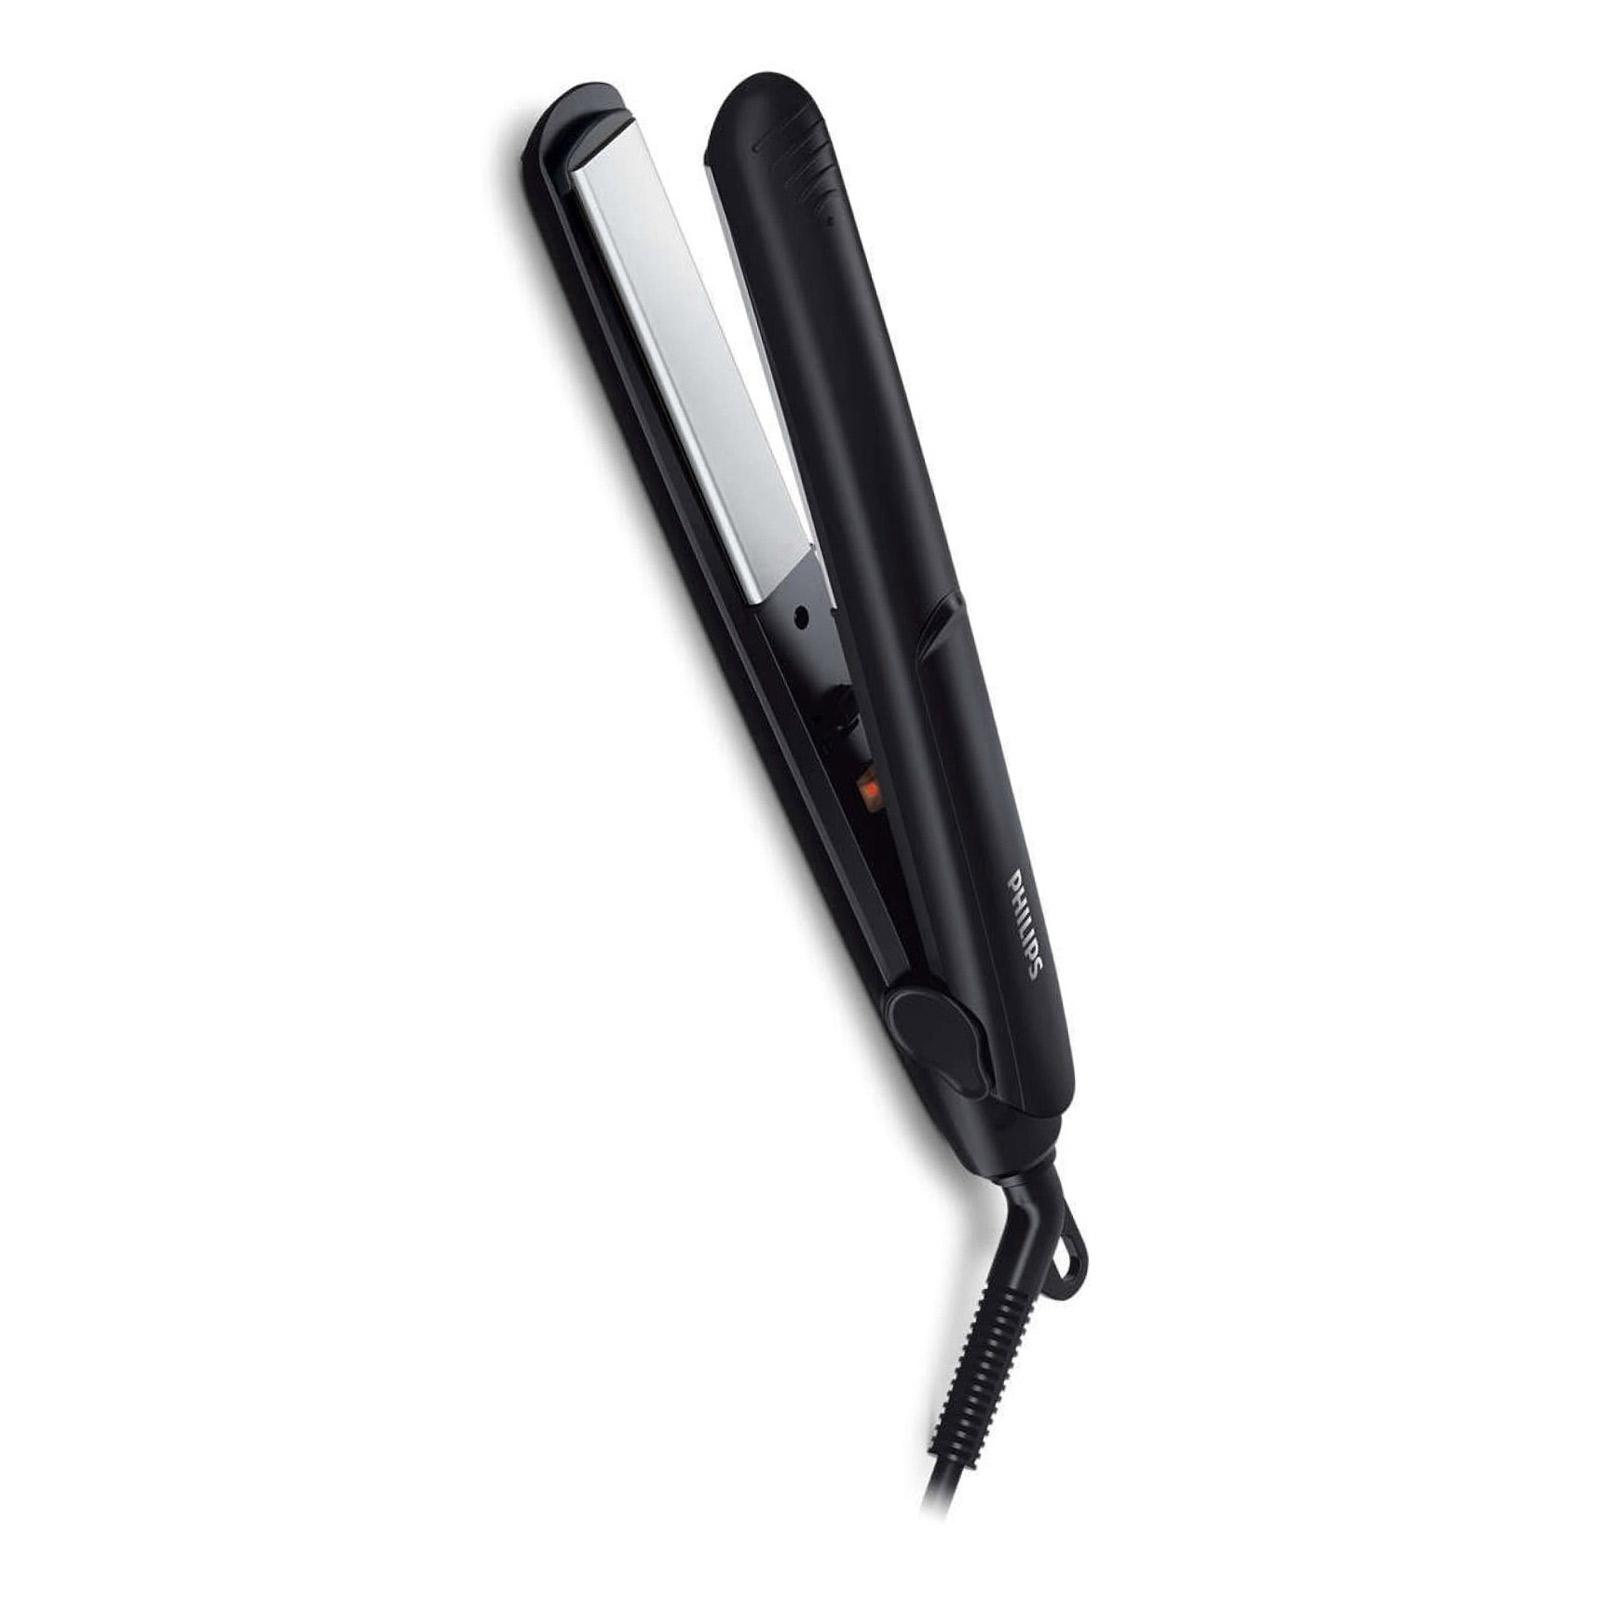 Buy Philips HP8303/06 Hair Straightener | Best Online Shopping in India |  Shop Mobiles, Laptops, Home Appliances & more at Best Offers & Deals!